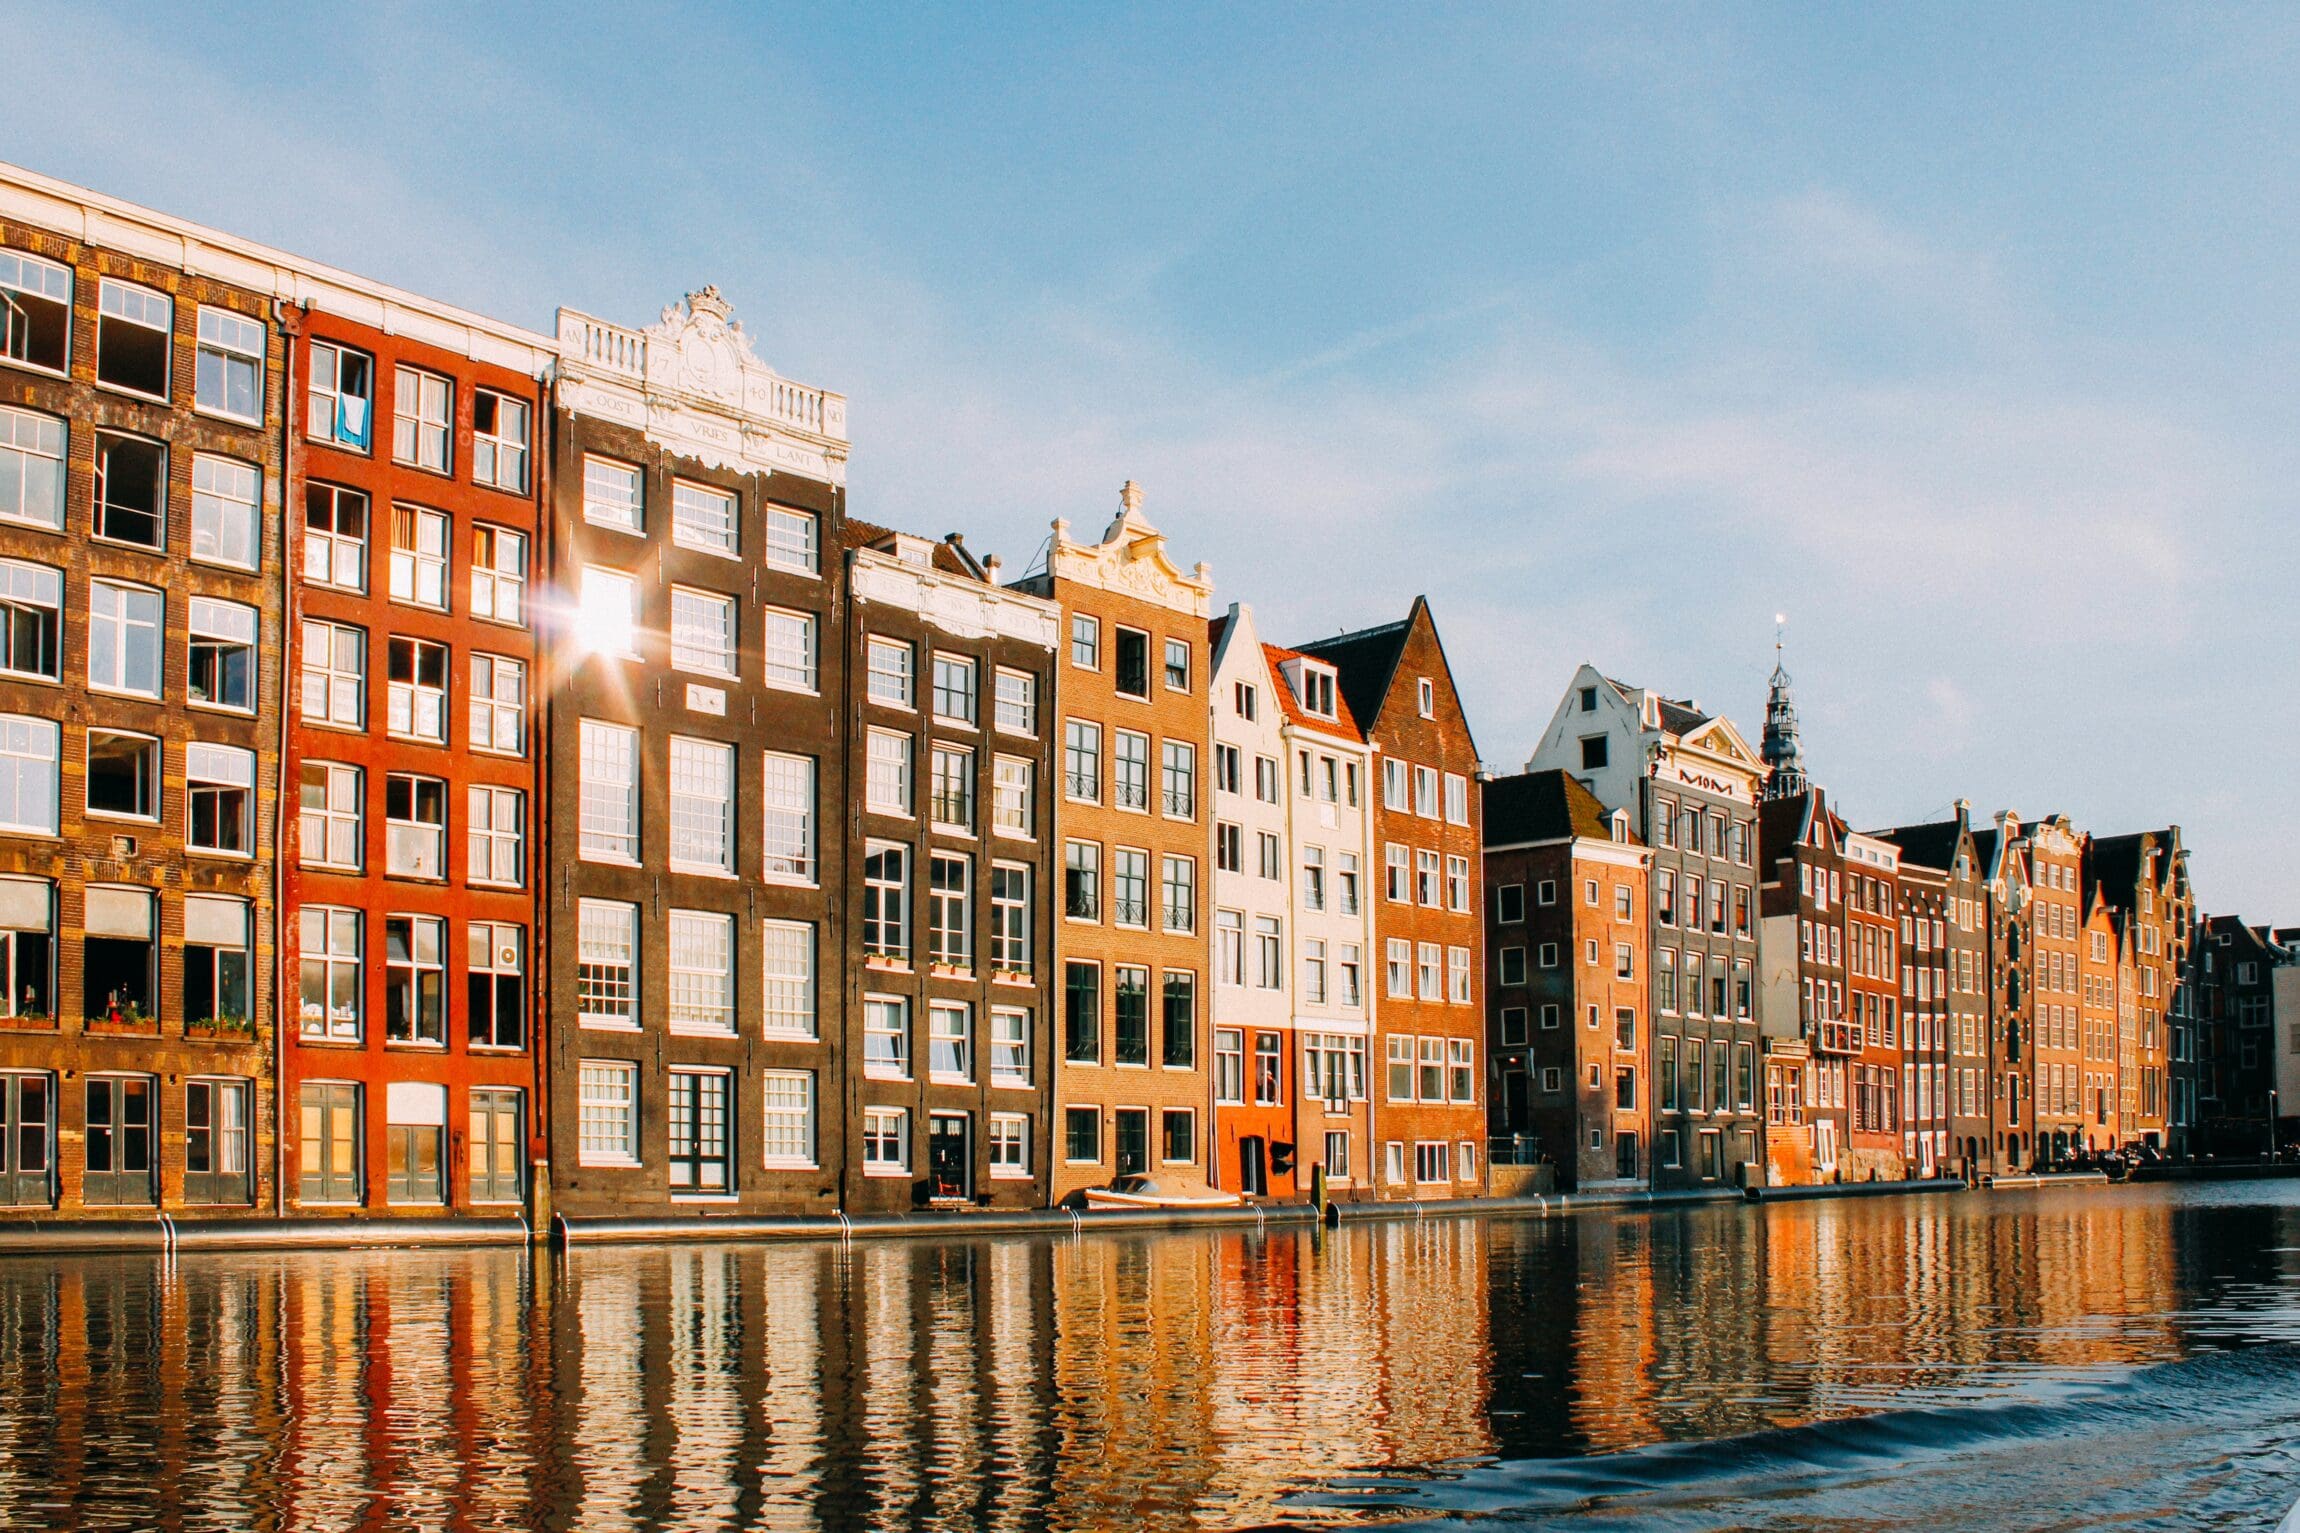 My city: Amsterdam | Orange, brown, and white row houses reflect along the canal with blue skies